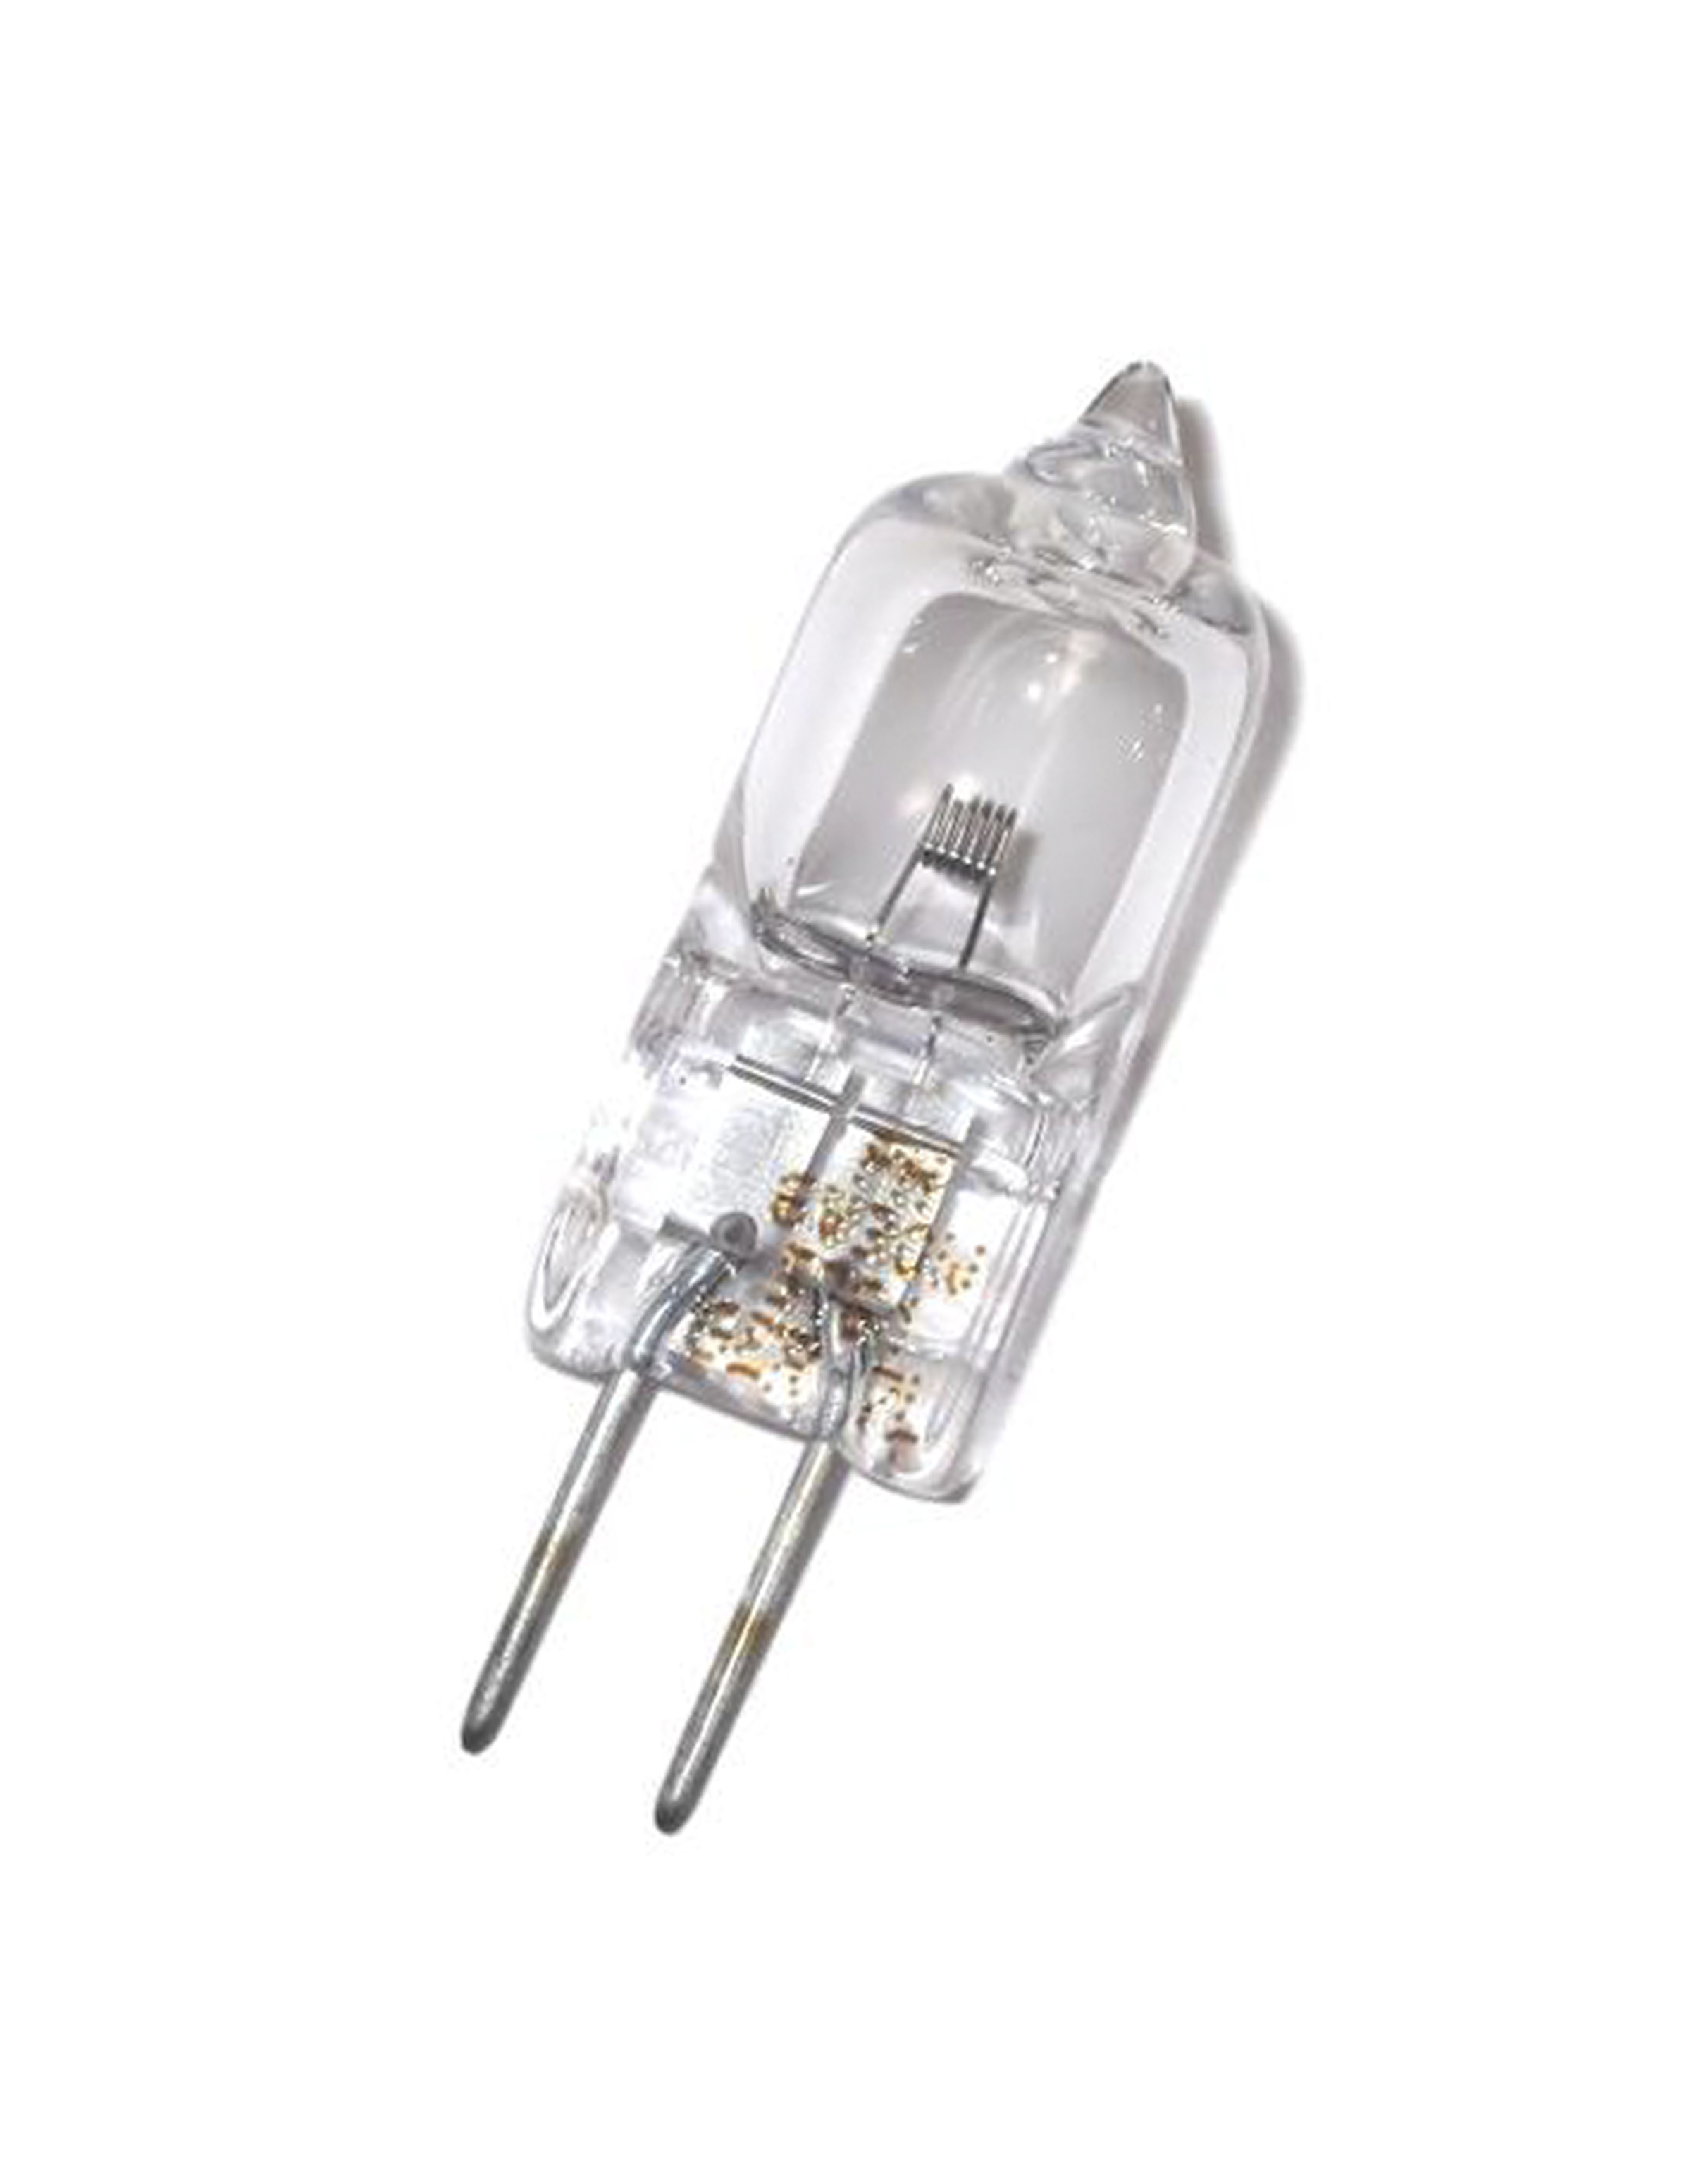 Replacement Bulbs - Quartz Halogen Lamp 6V/30W (For BA/AE&DMBA) - (110